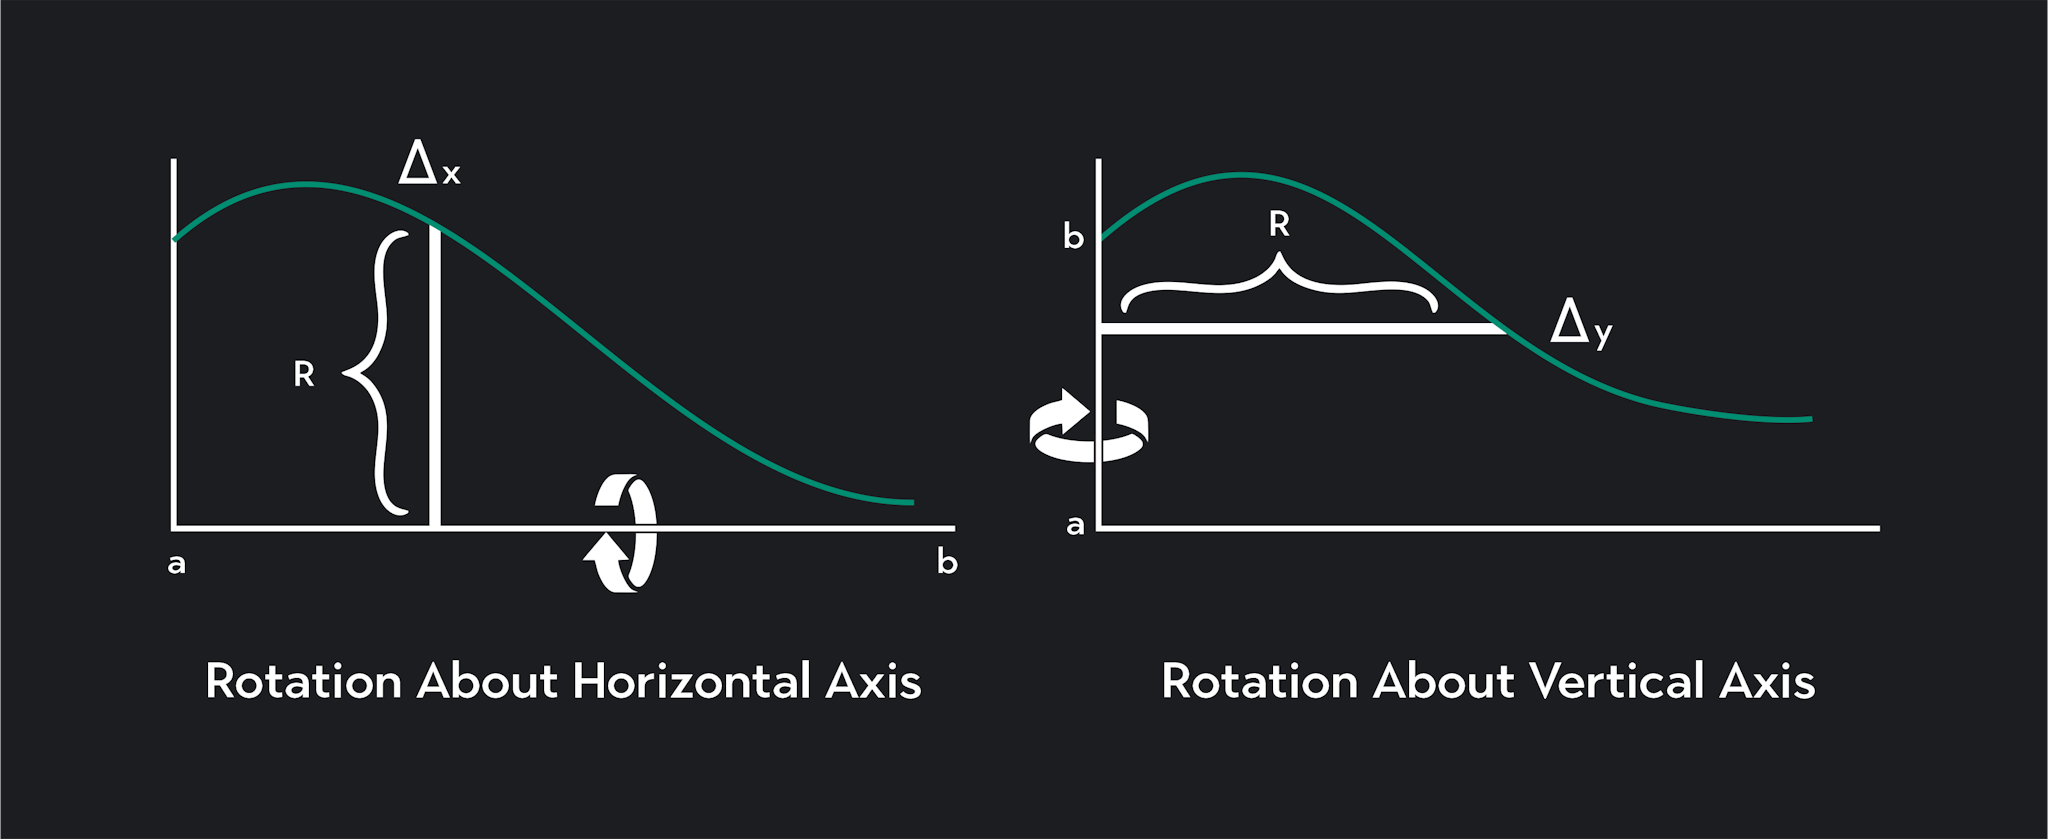 A disk method graphic showing rotation around a horizontal axis and  rotation around a vertical axis